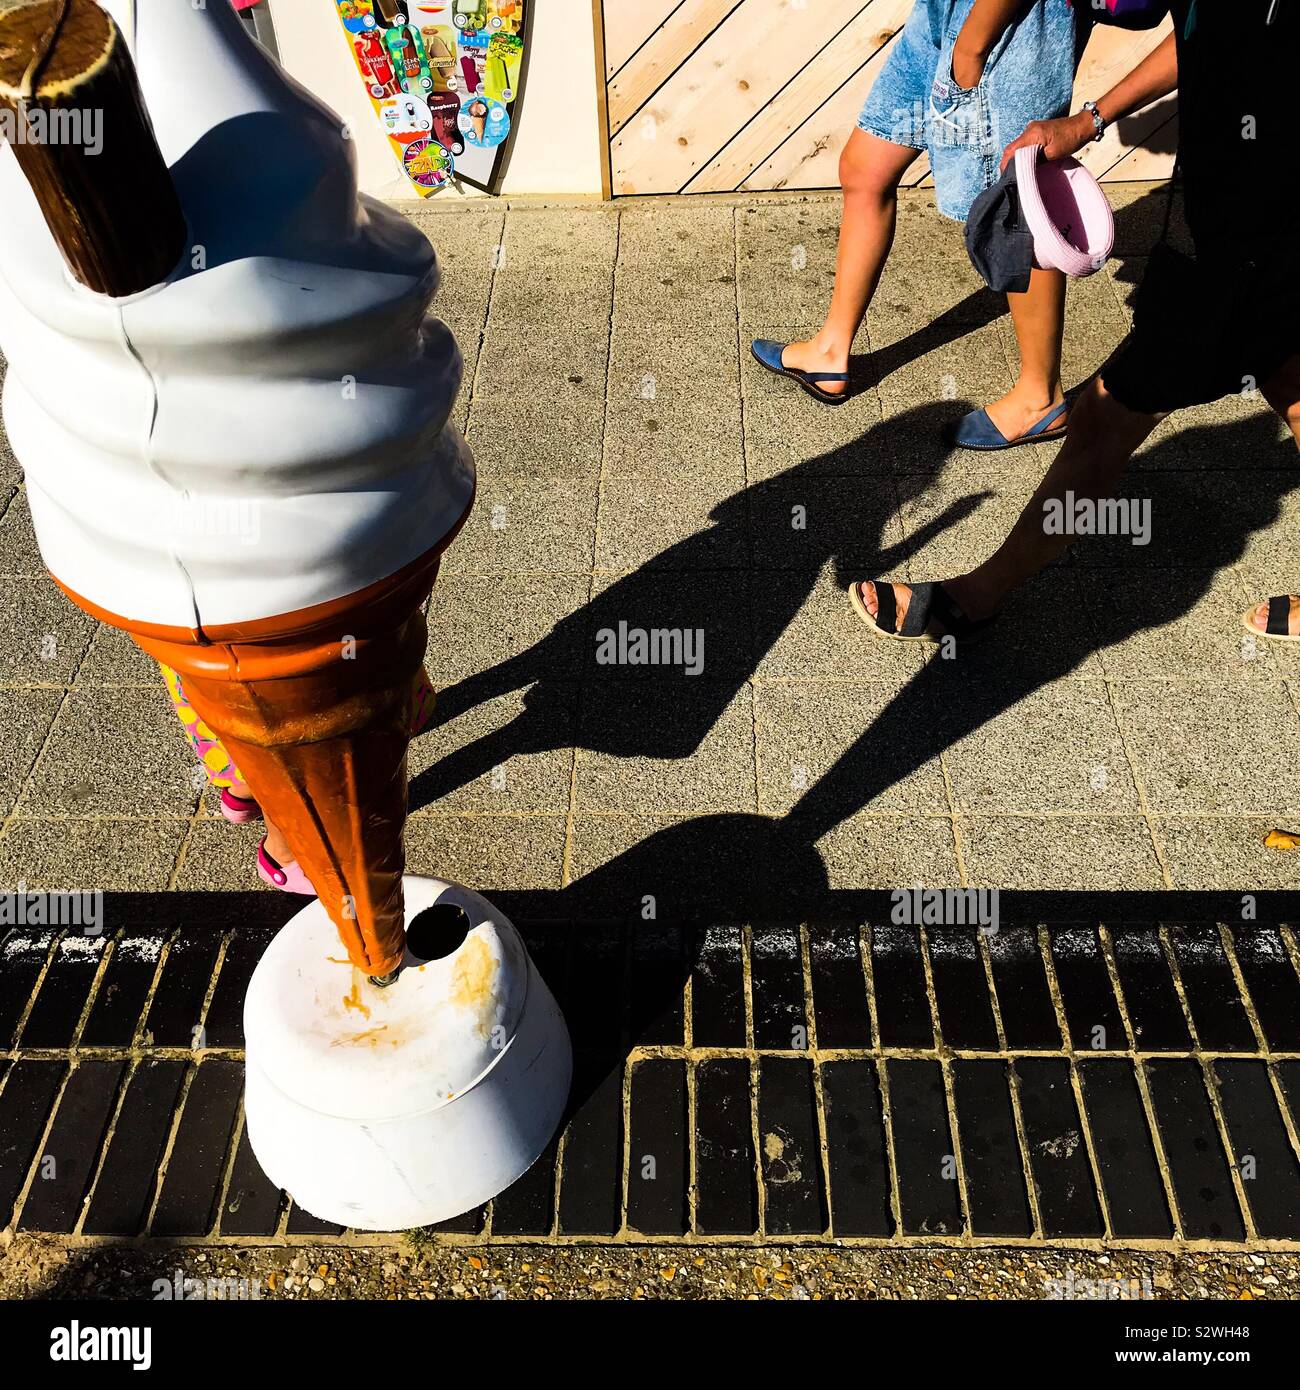 A beach seafront promenade scene showing feet legs and shadows of people walking past an ice cream kiosk large cone advertising model Stock Photo